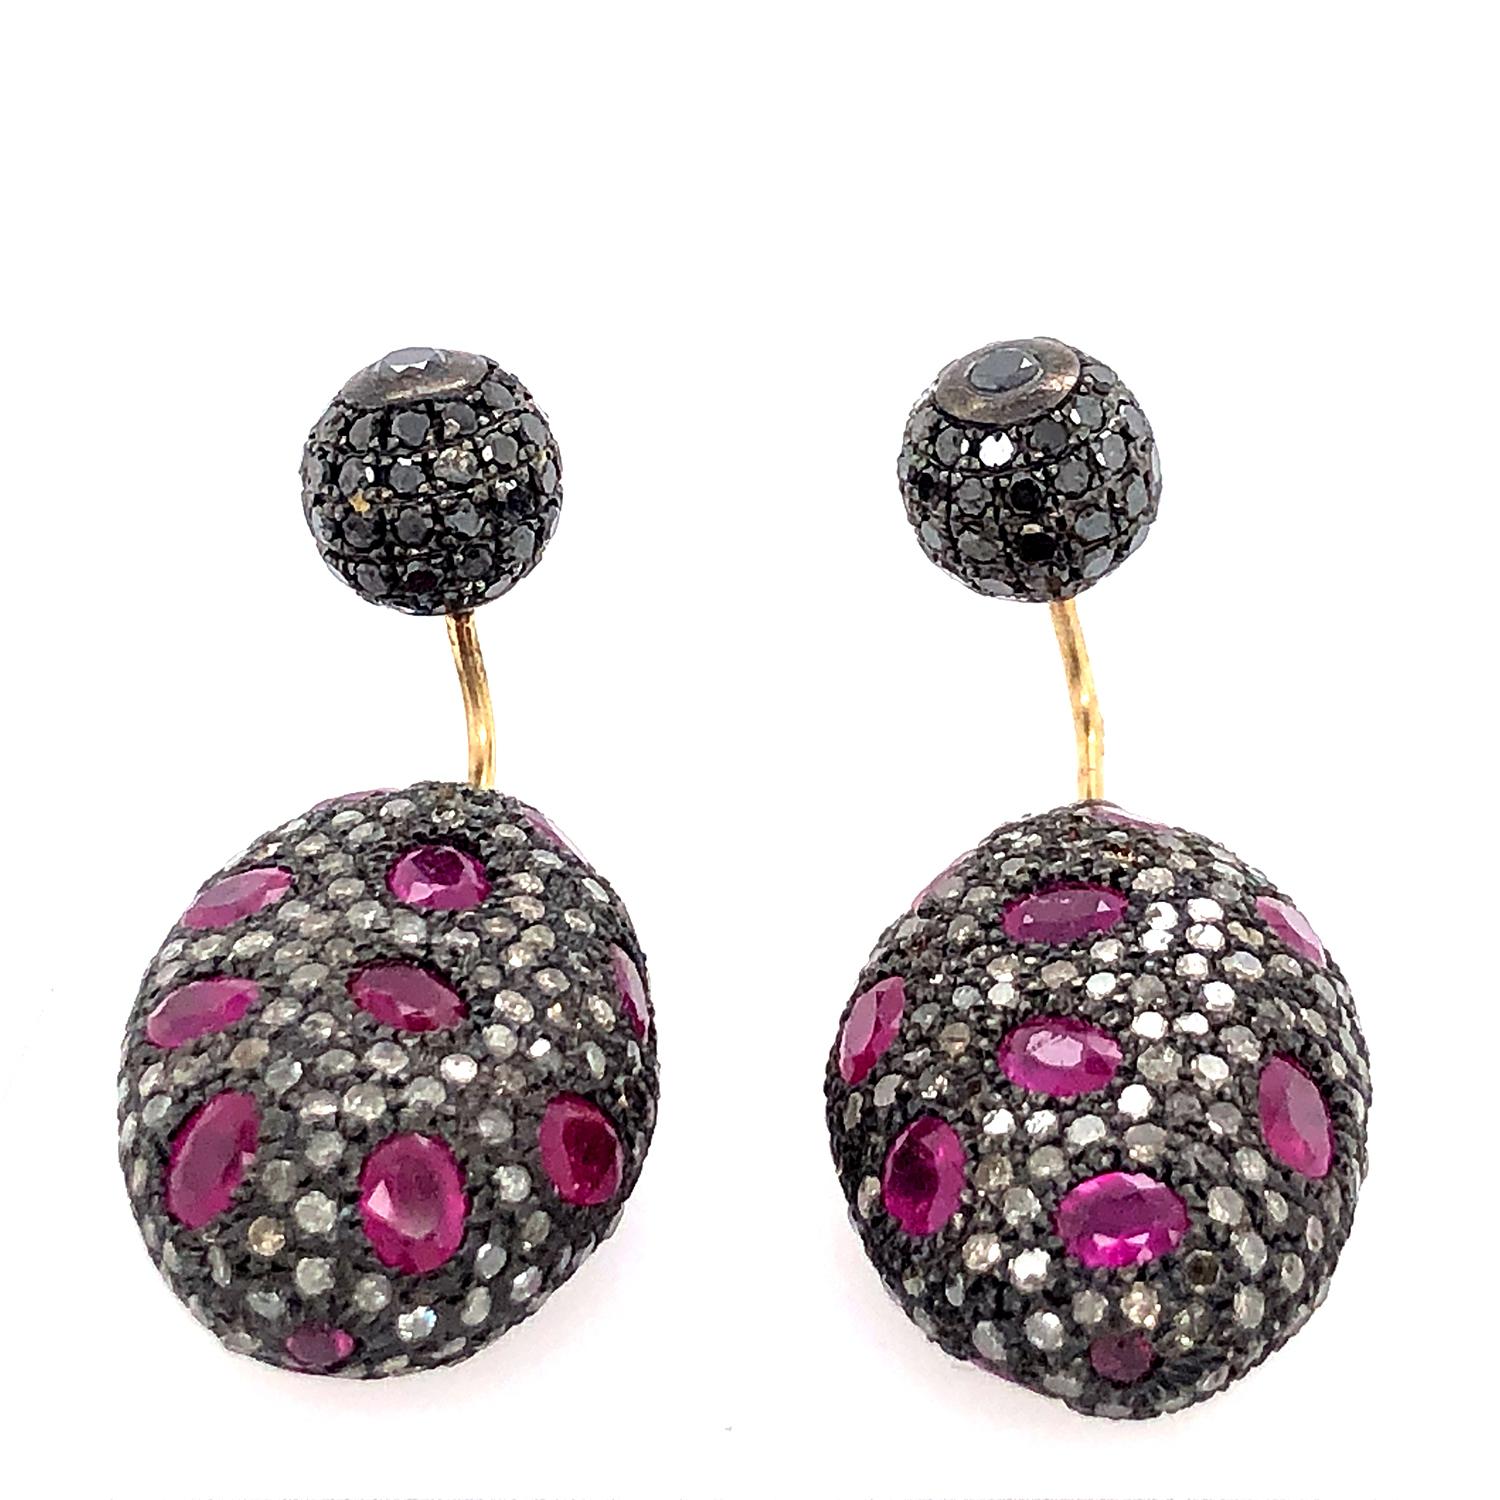 Mixed Cut Nugget Shaped Pave Diamond & Ruby Earring Made in 14k Gold & Silver For Sale